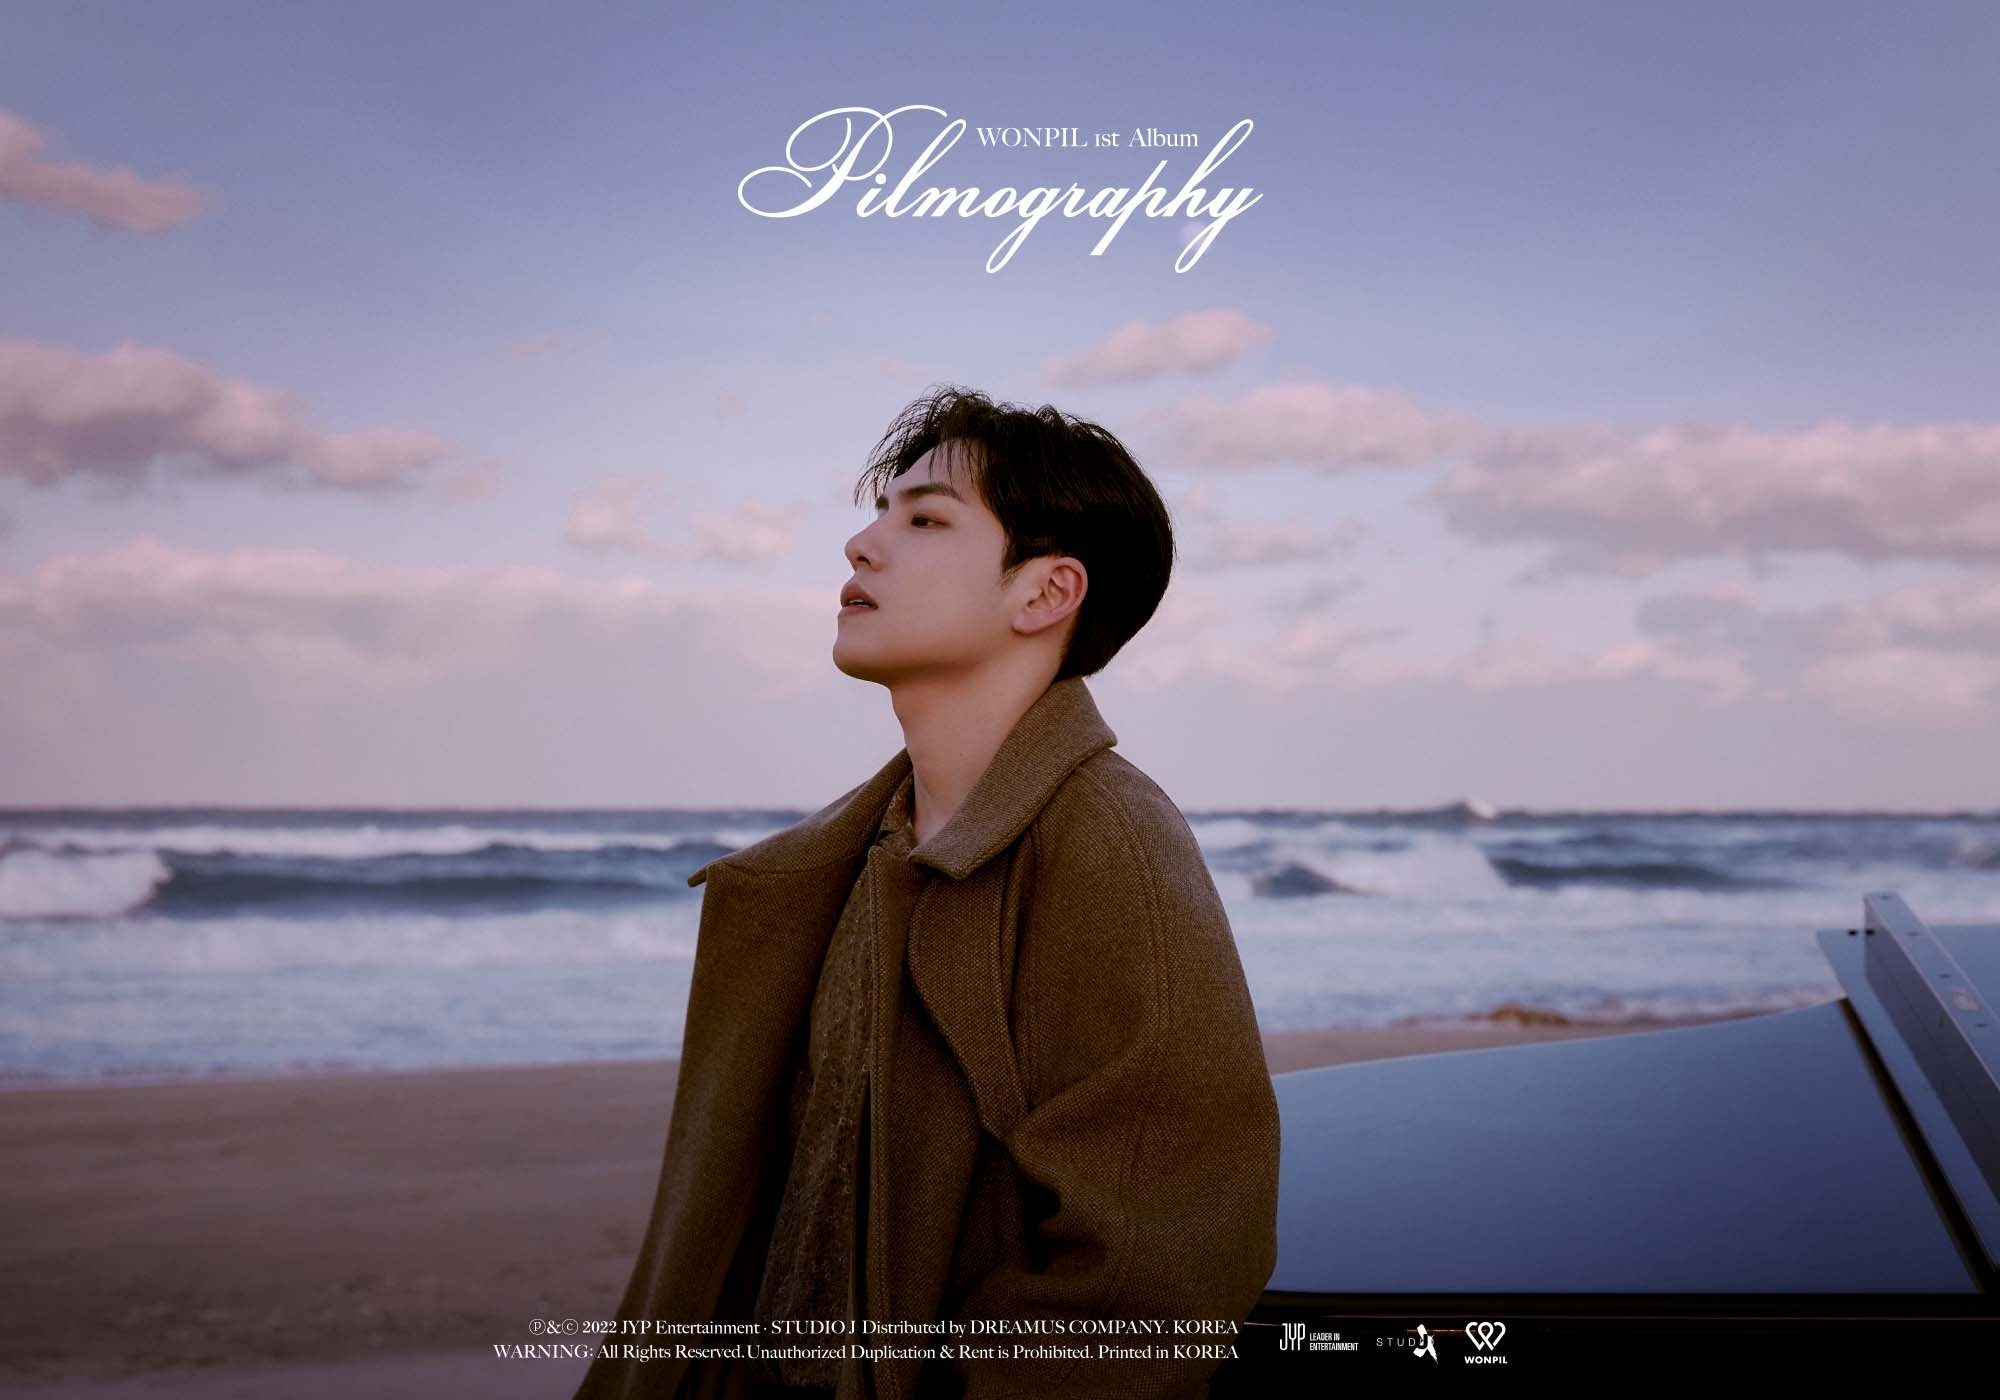 Wonpil’s ‘Pilmography’ review: A colorful reflection on loss and starting anew